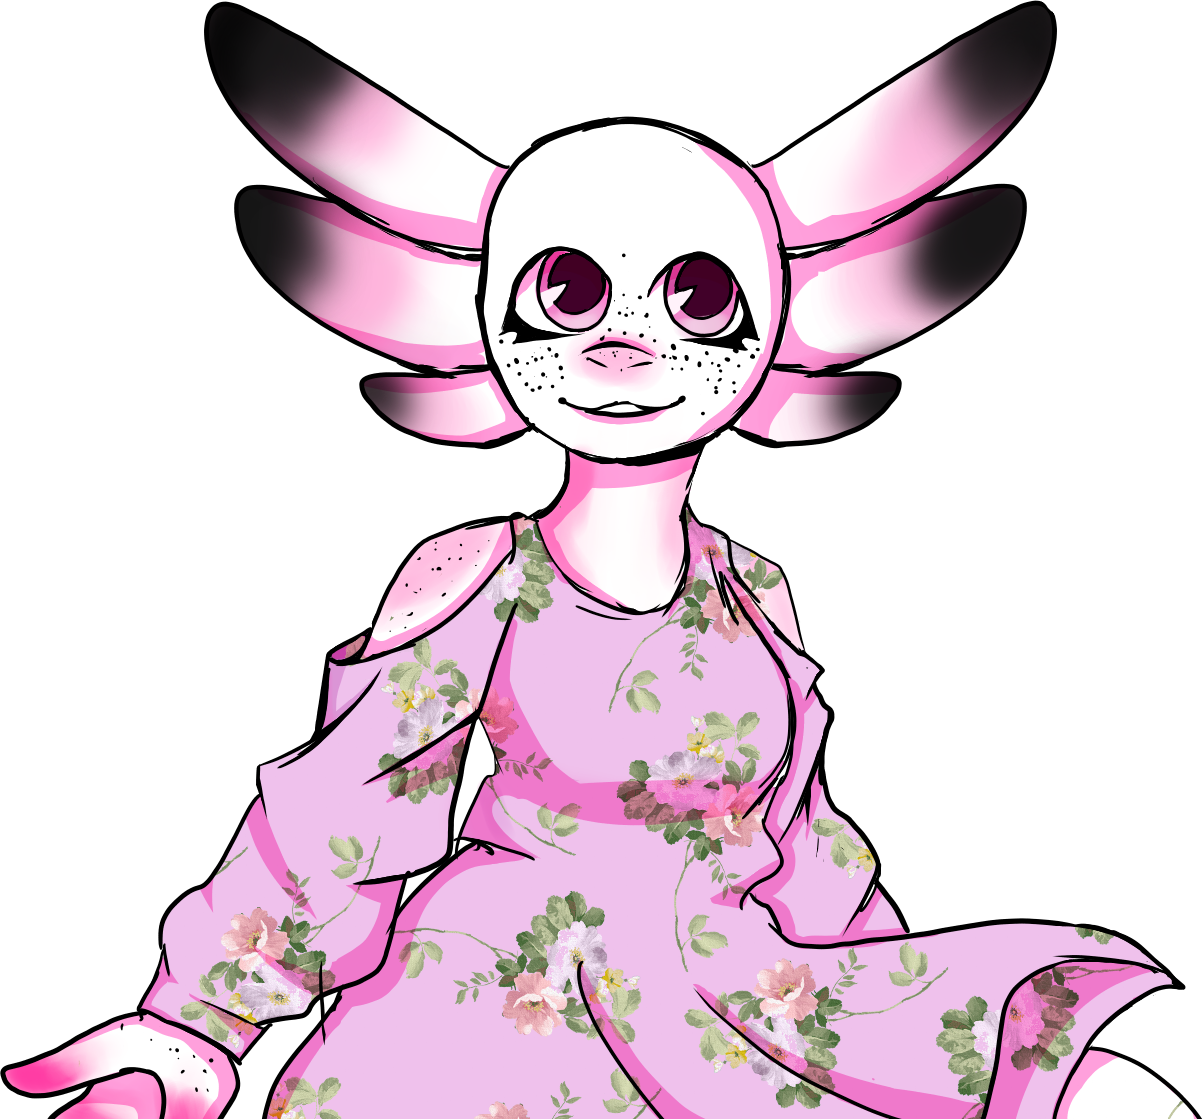 An axolotl fursona. She is largely pink, with a pink dress and black-tipped gills. There is a flower pattern on her dress.